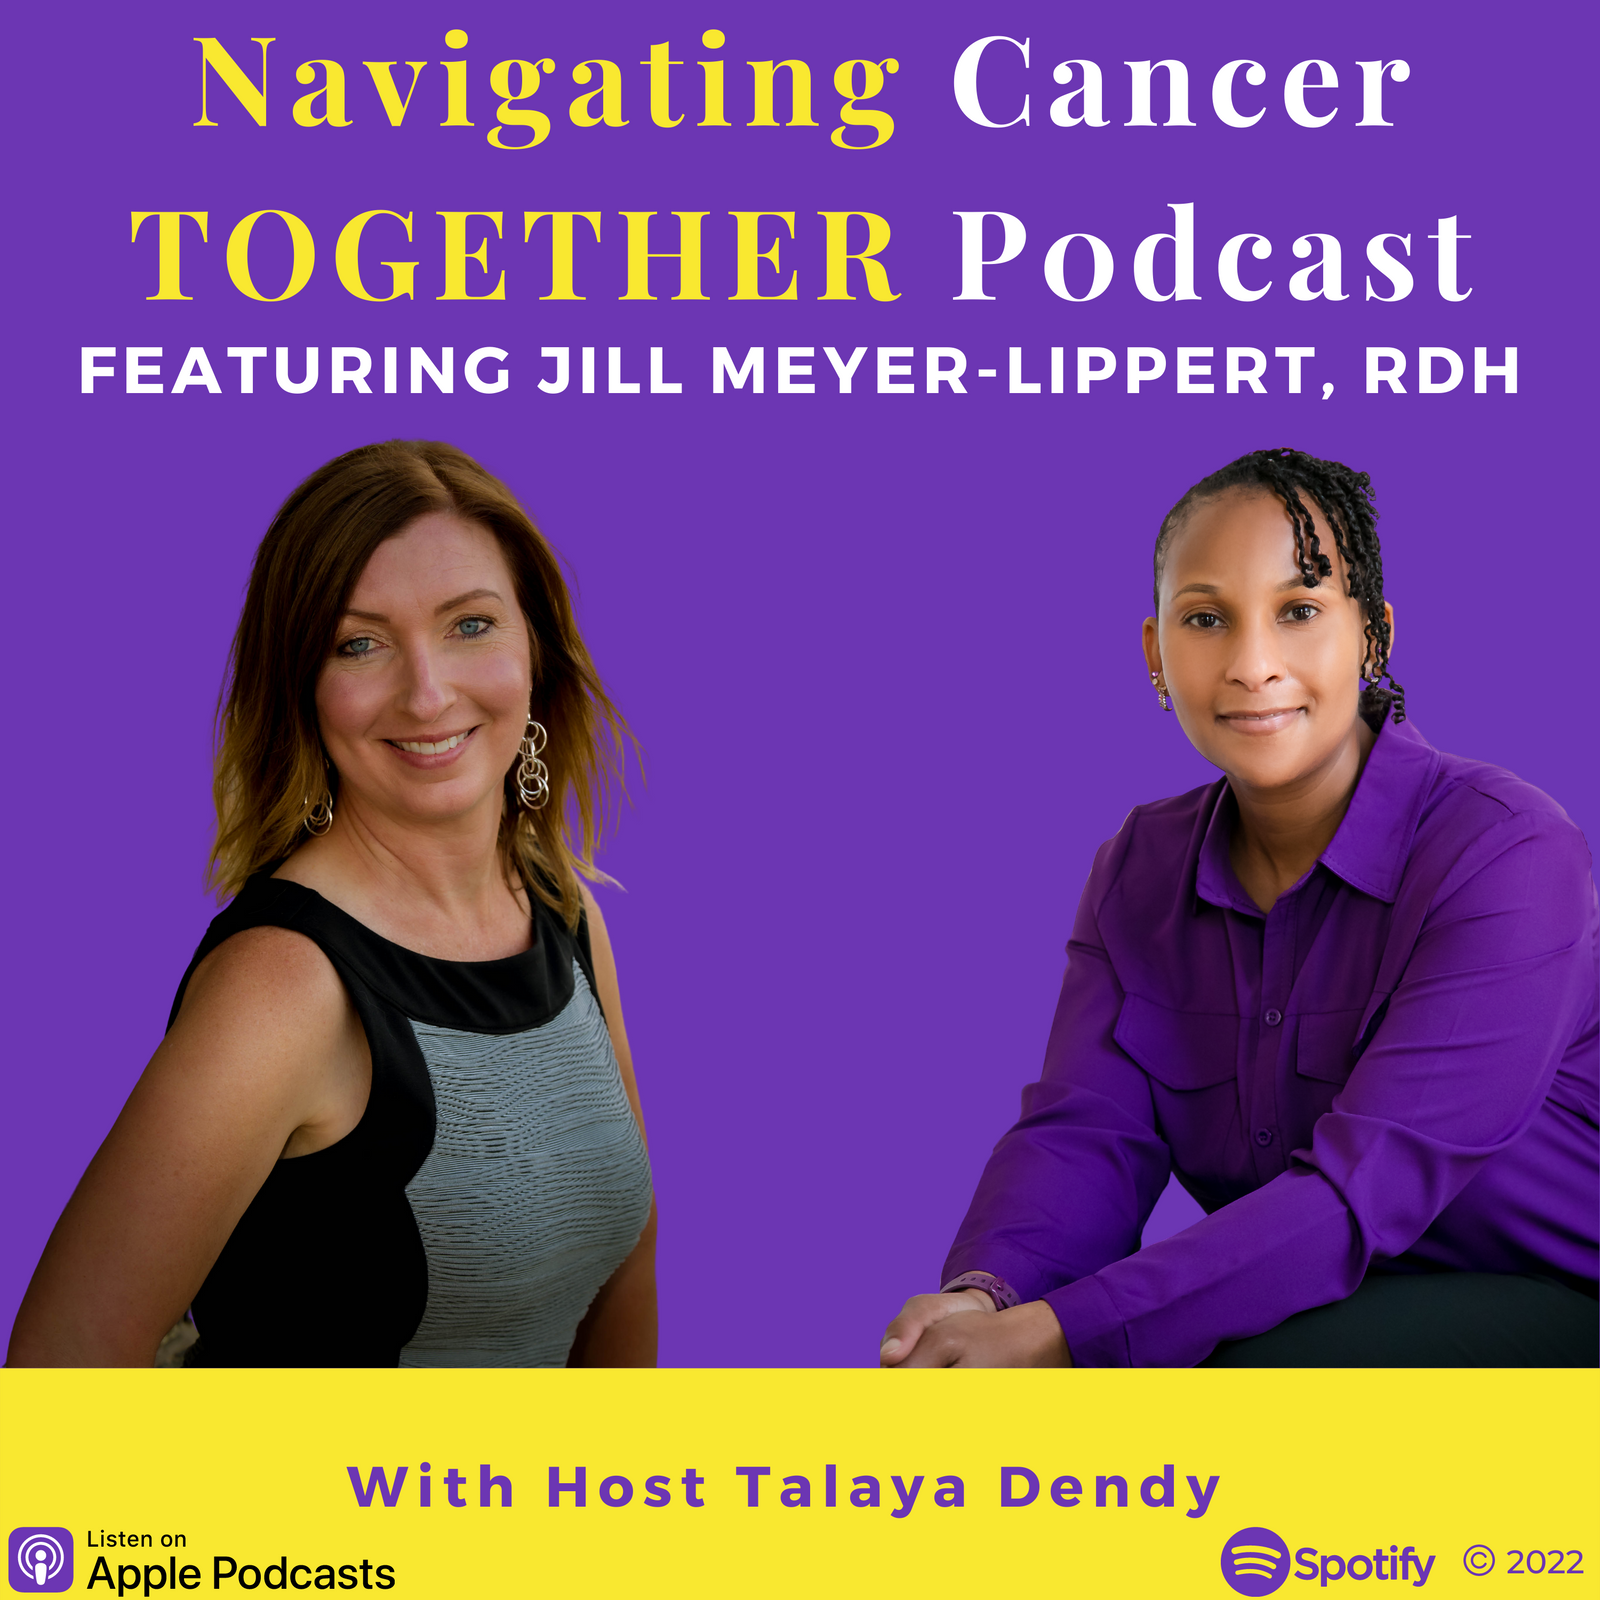 Listen in as Jill joins the Navigating Cancer Together podcast to discuss Side Effect Support